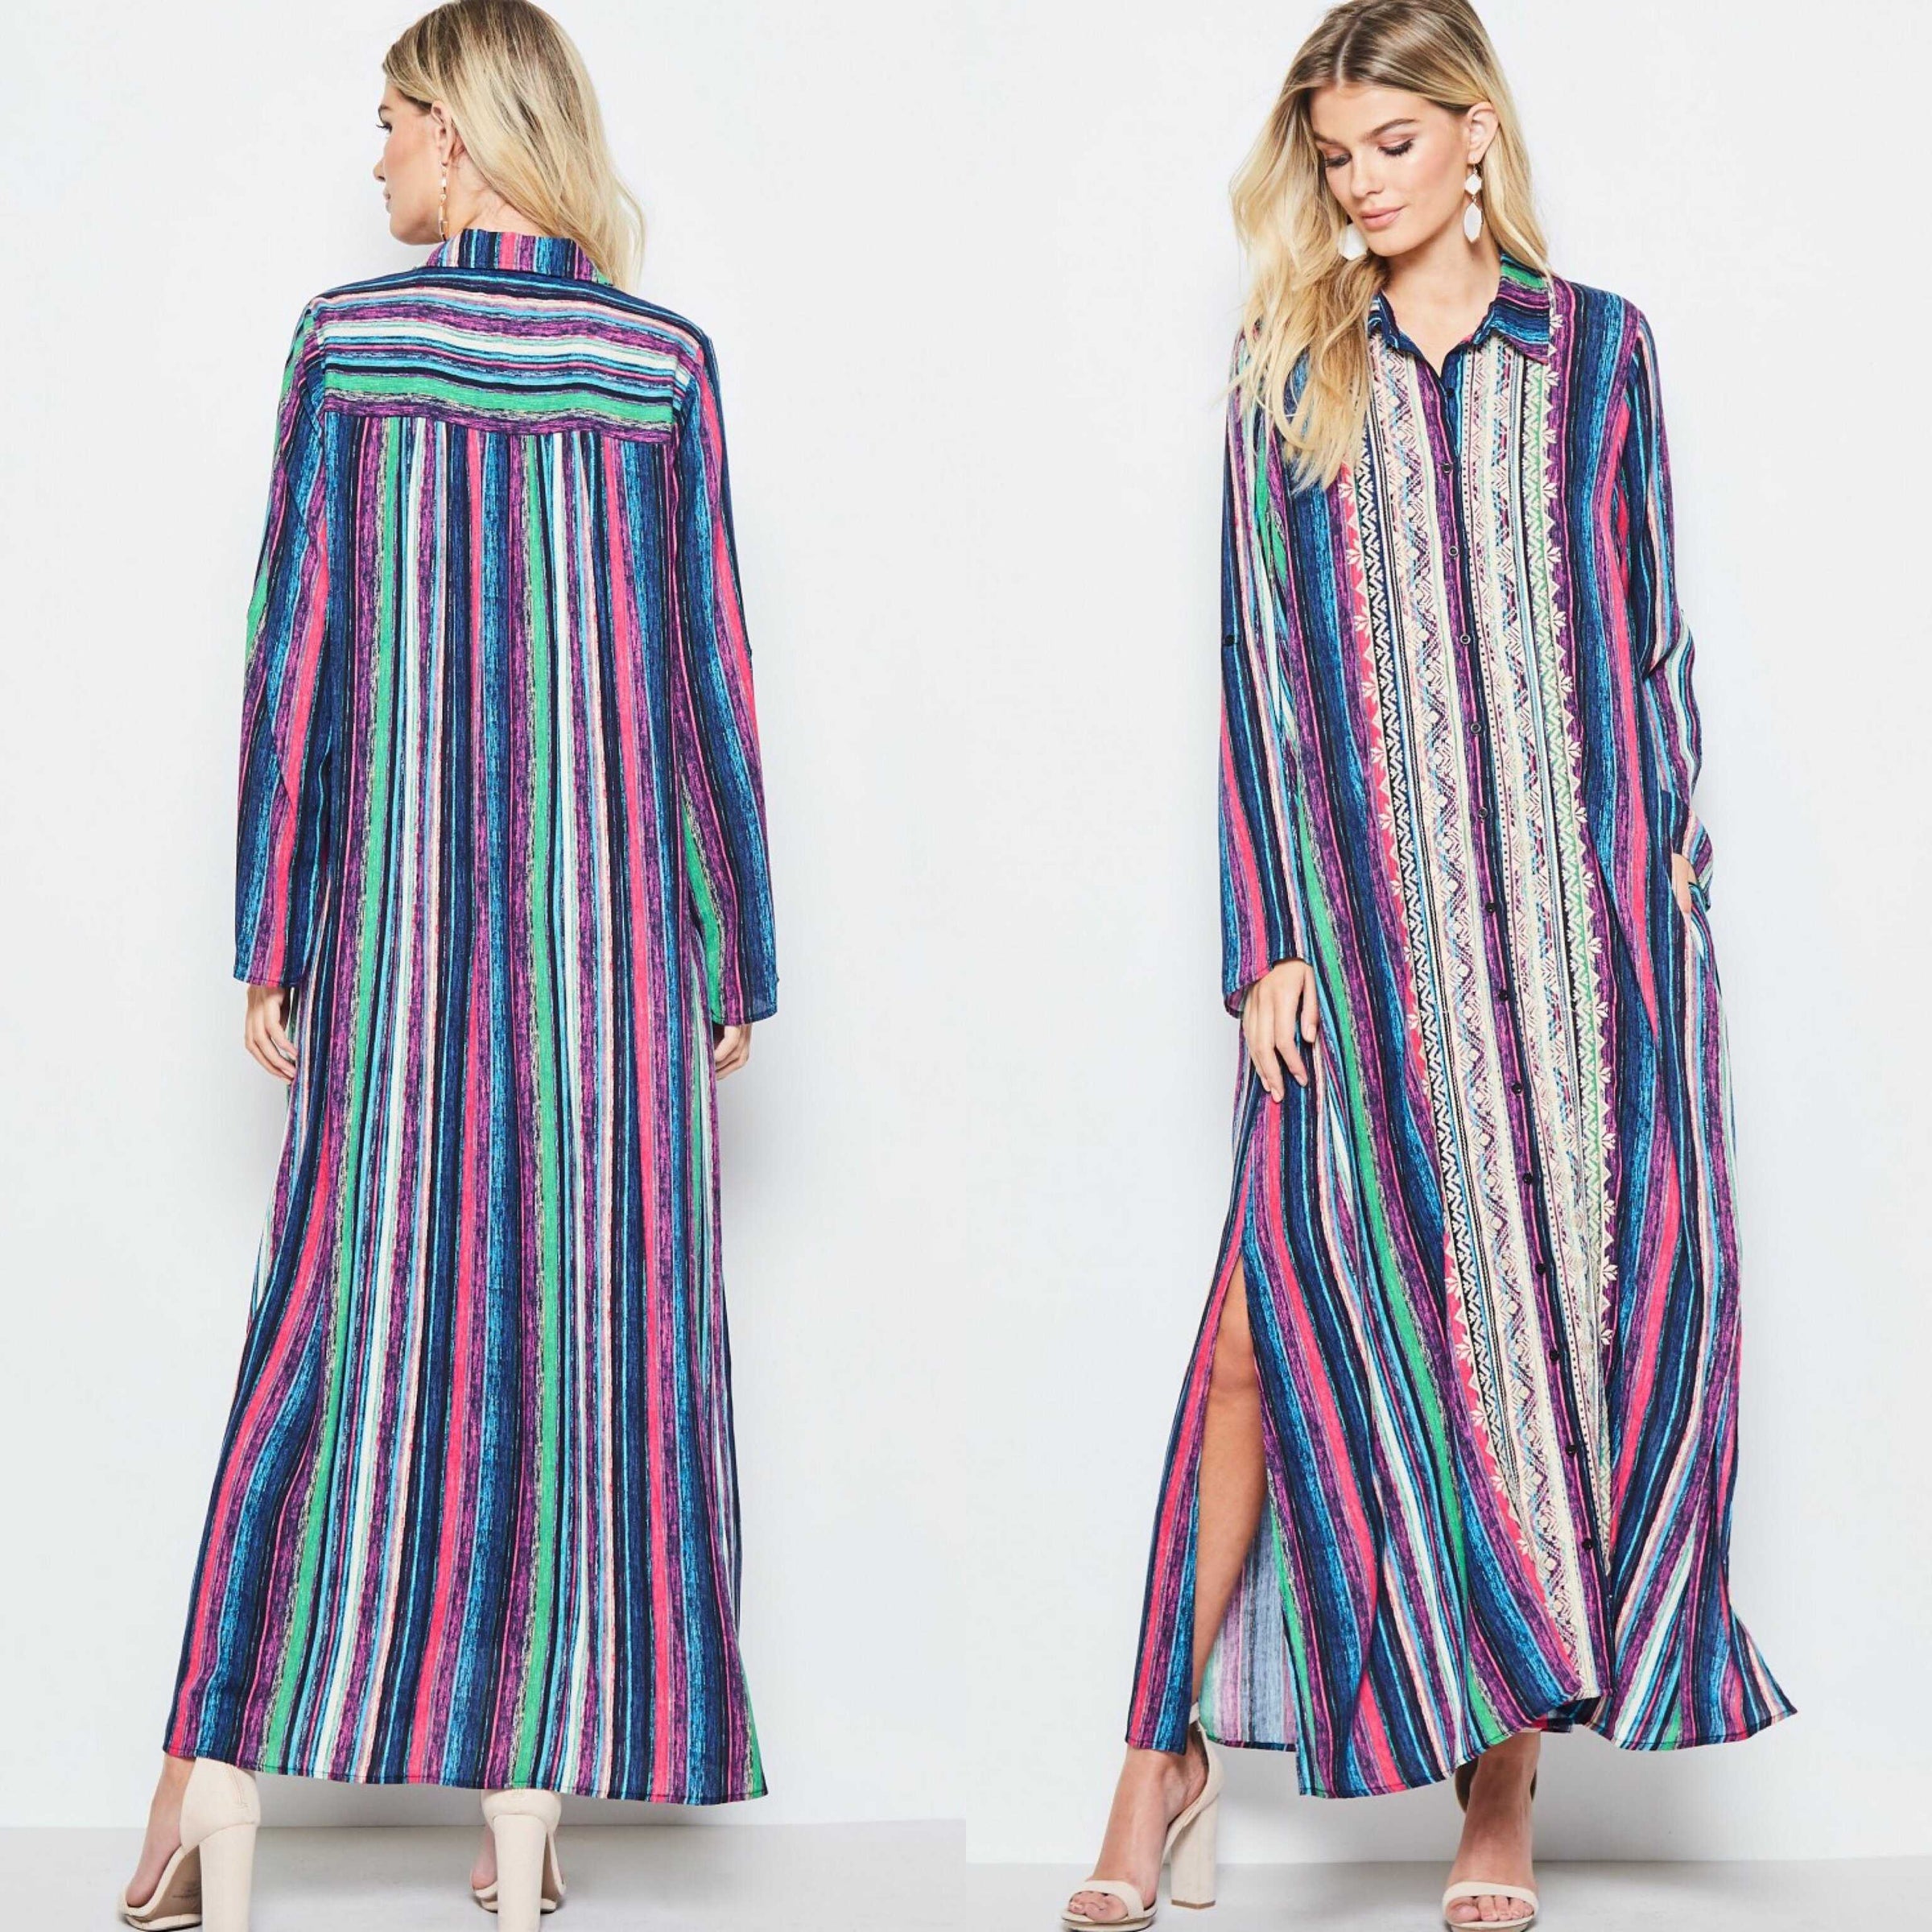 Boho Embroidered Candy Stripe Maxi Duster - TheBrownEyedGirl Boutique